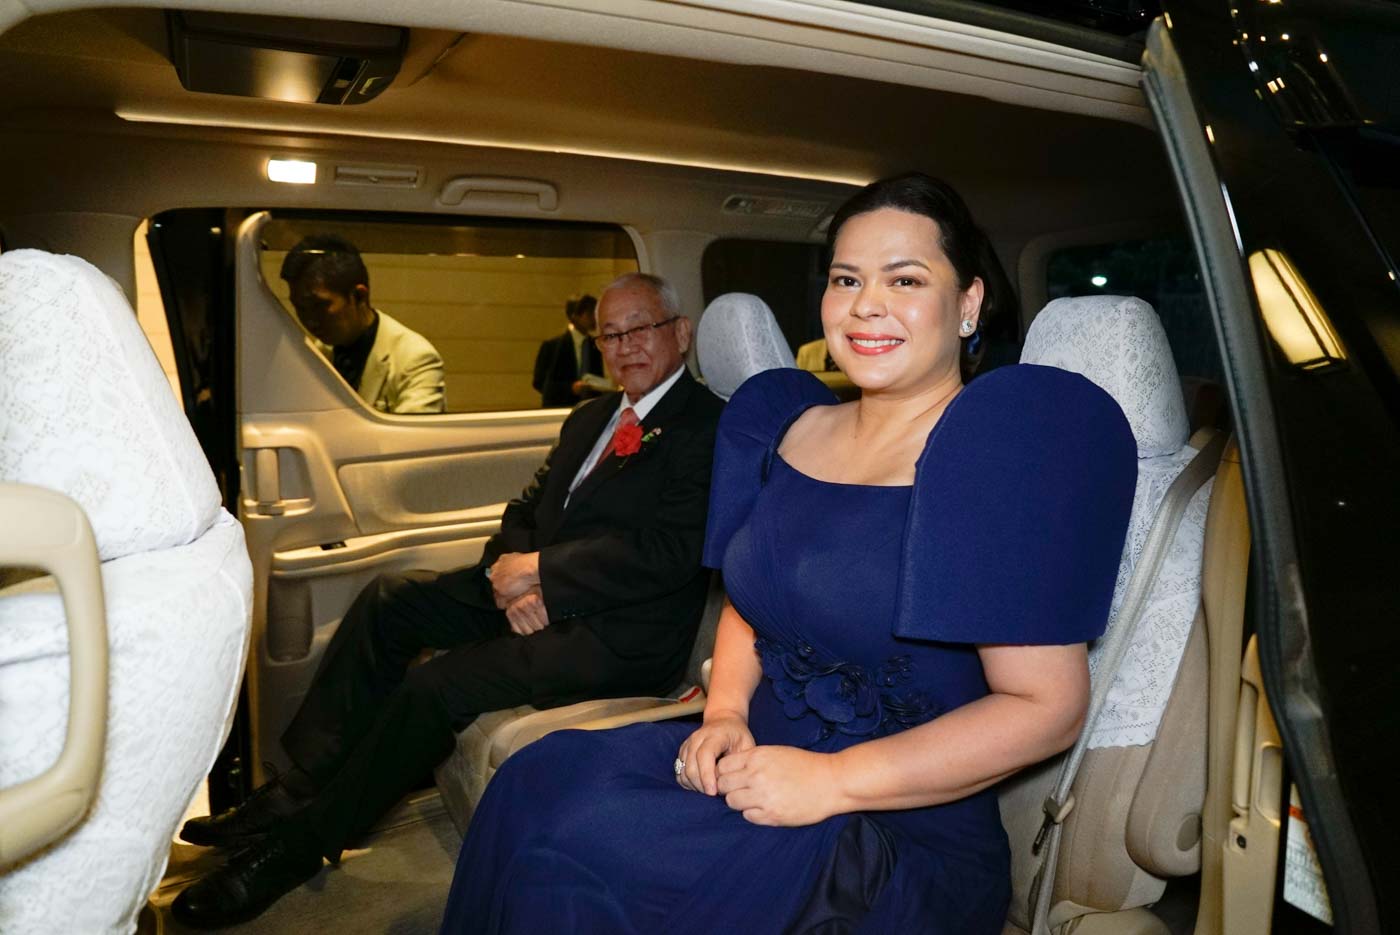 SARA DUTERTE. President Rodrigo Roa Duterte's daughter, Davao City Mayor Sara Duterte-Carpio, prepares to depart from the Hotel New Otani in Tokyo, Japan after attending the state banquet hosted by Prime Minister Shinzo Abe on October 23, 2019. File photo by King Rodriguez/Presidential Photo 